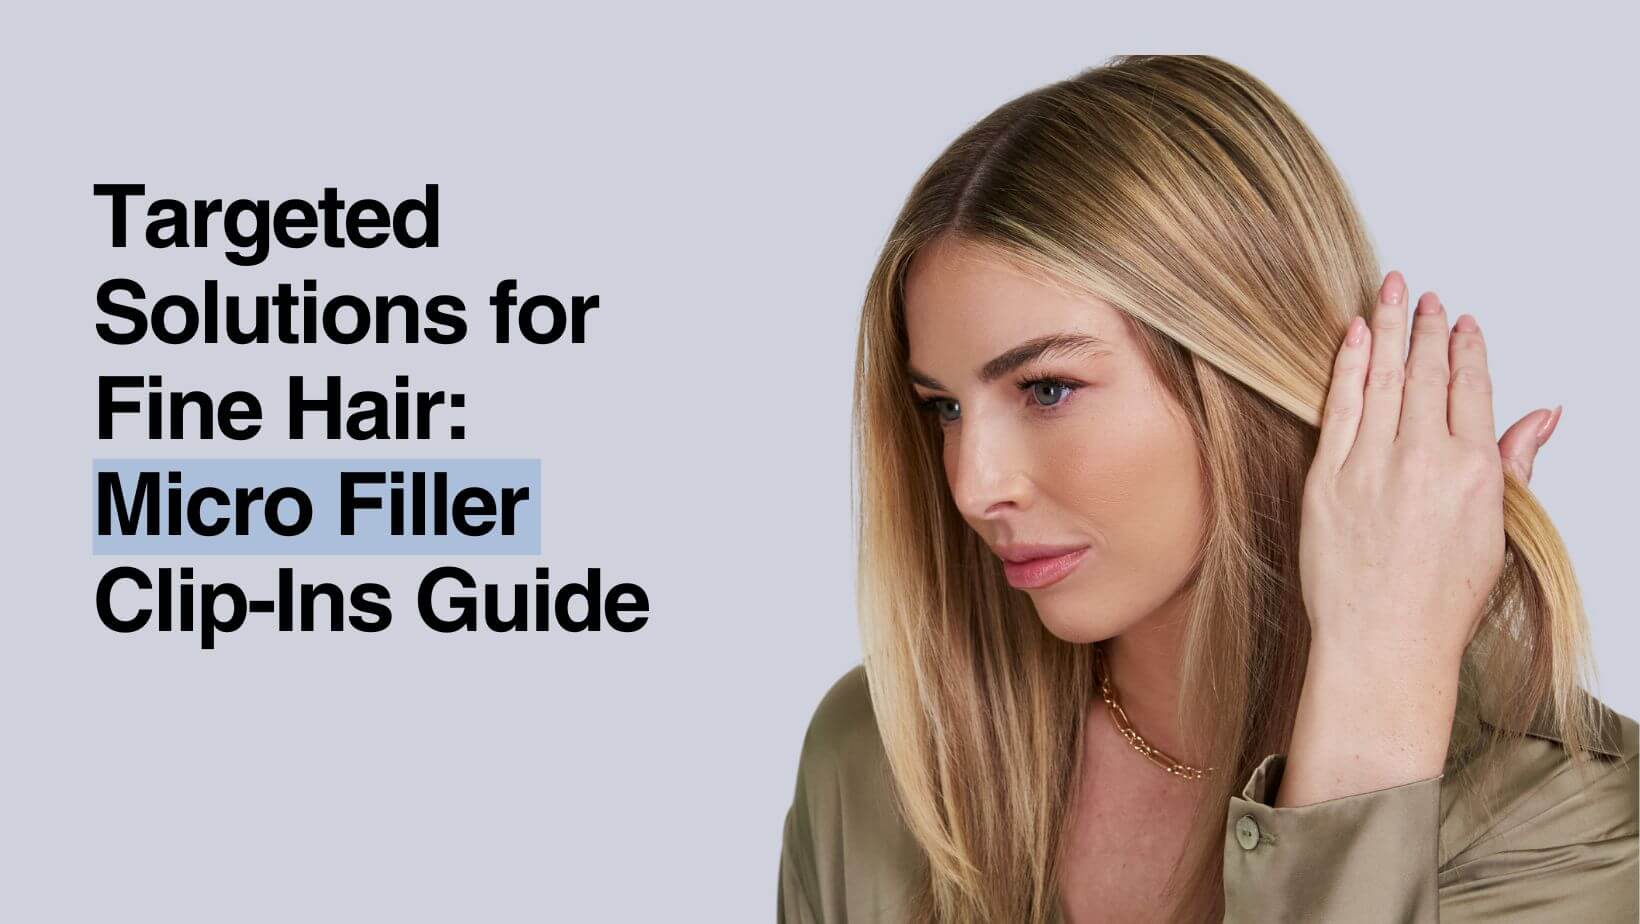 Targeted Solutions for Fine Hair: Micro Filler Clip-Ins Guide